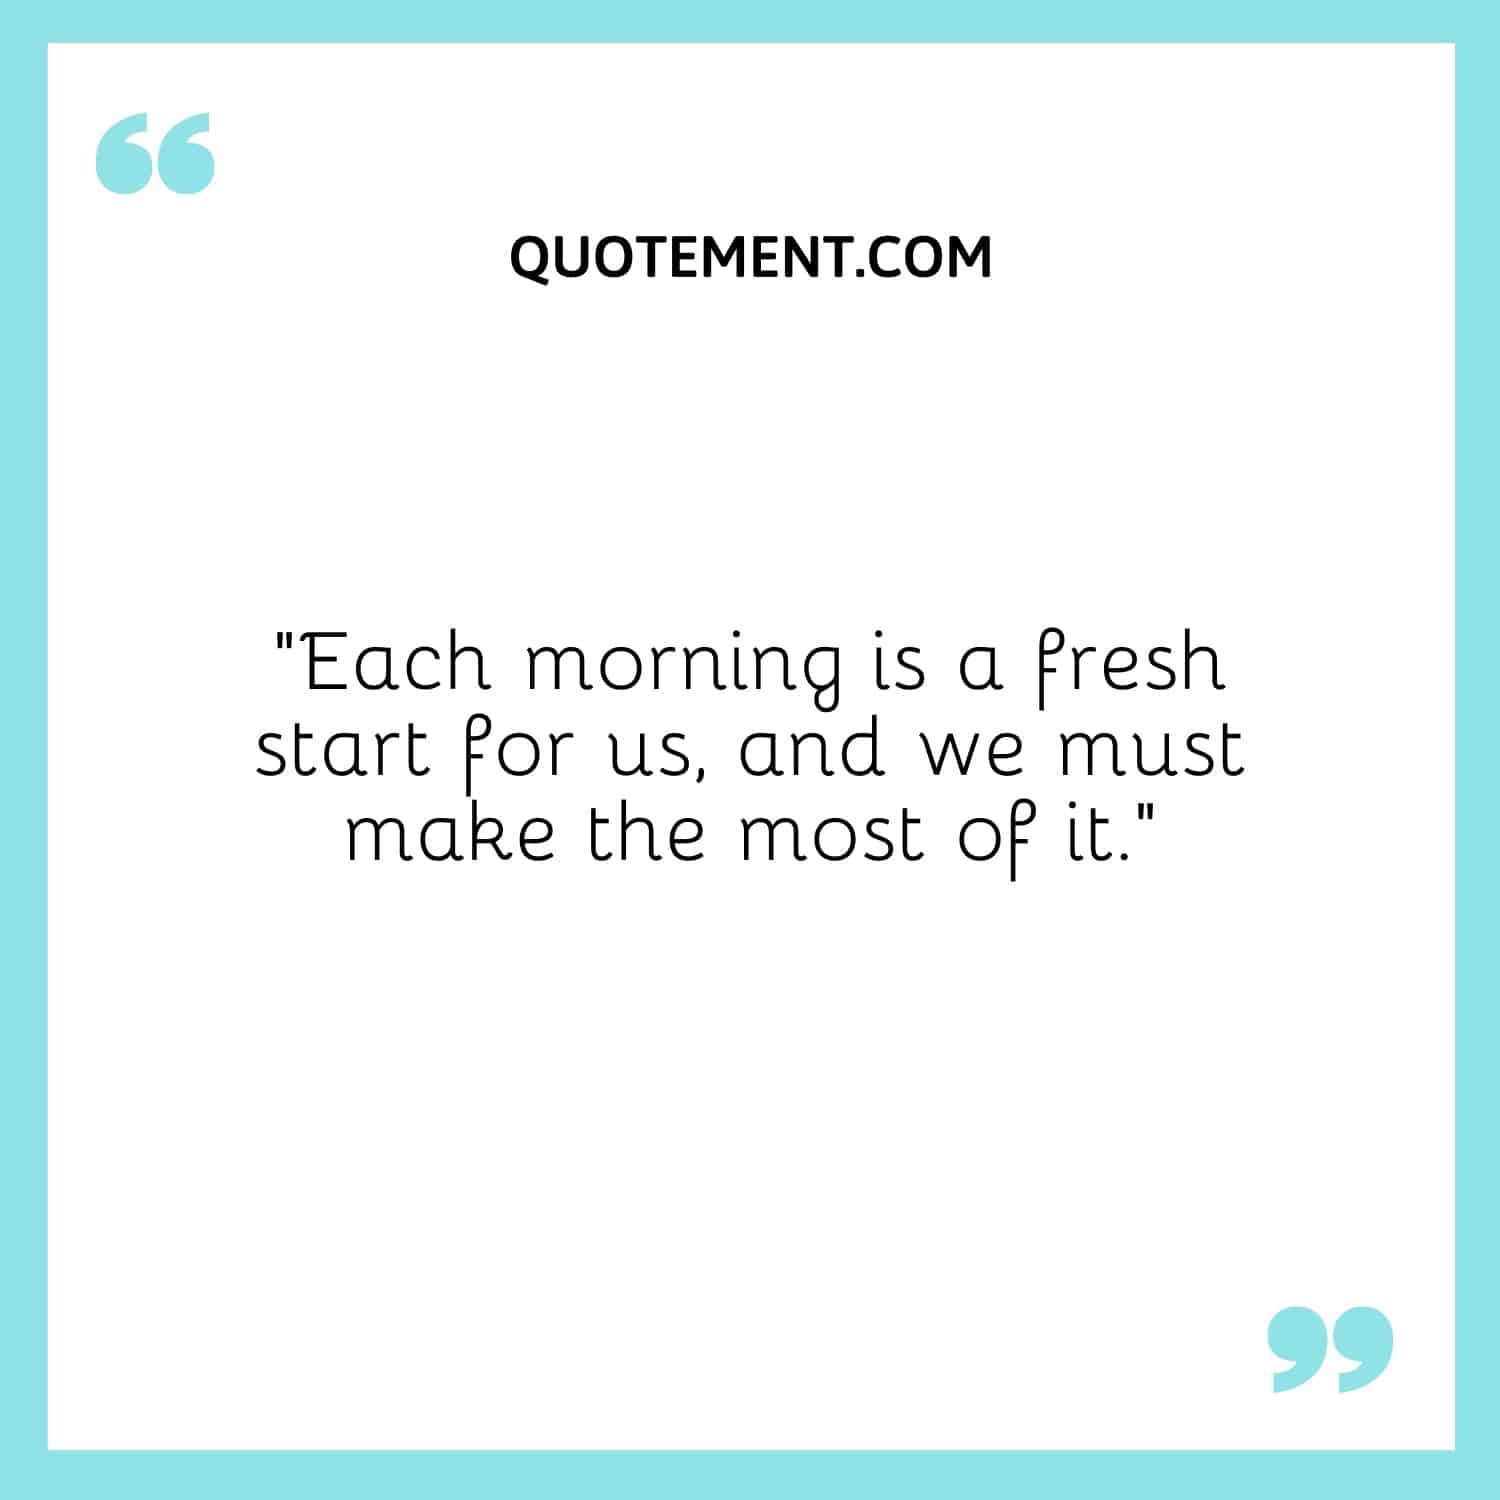 Each morning is a fresh start for us